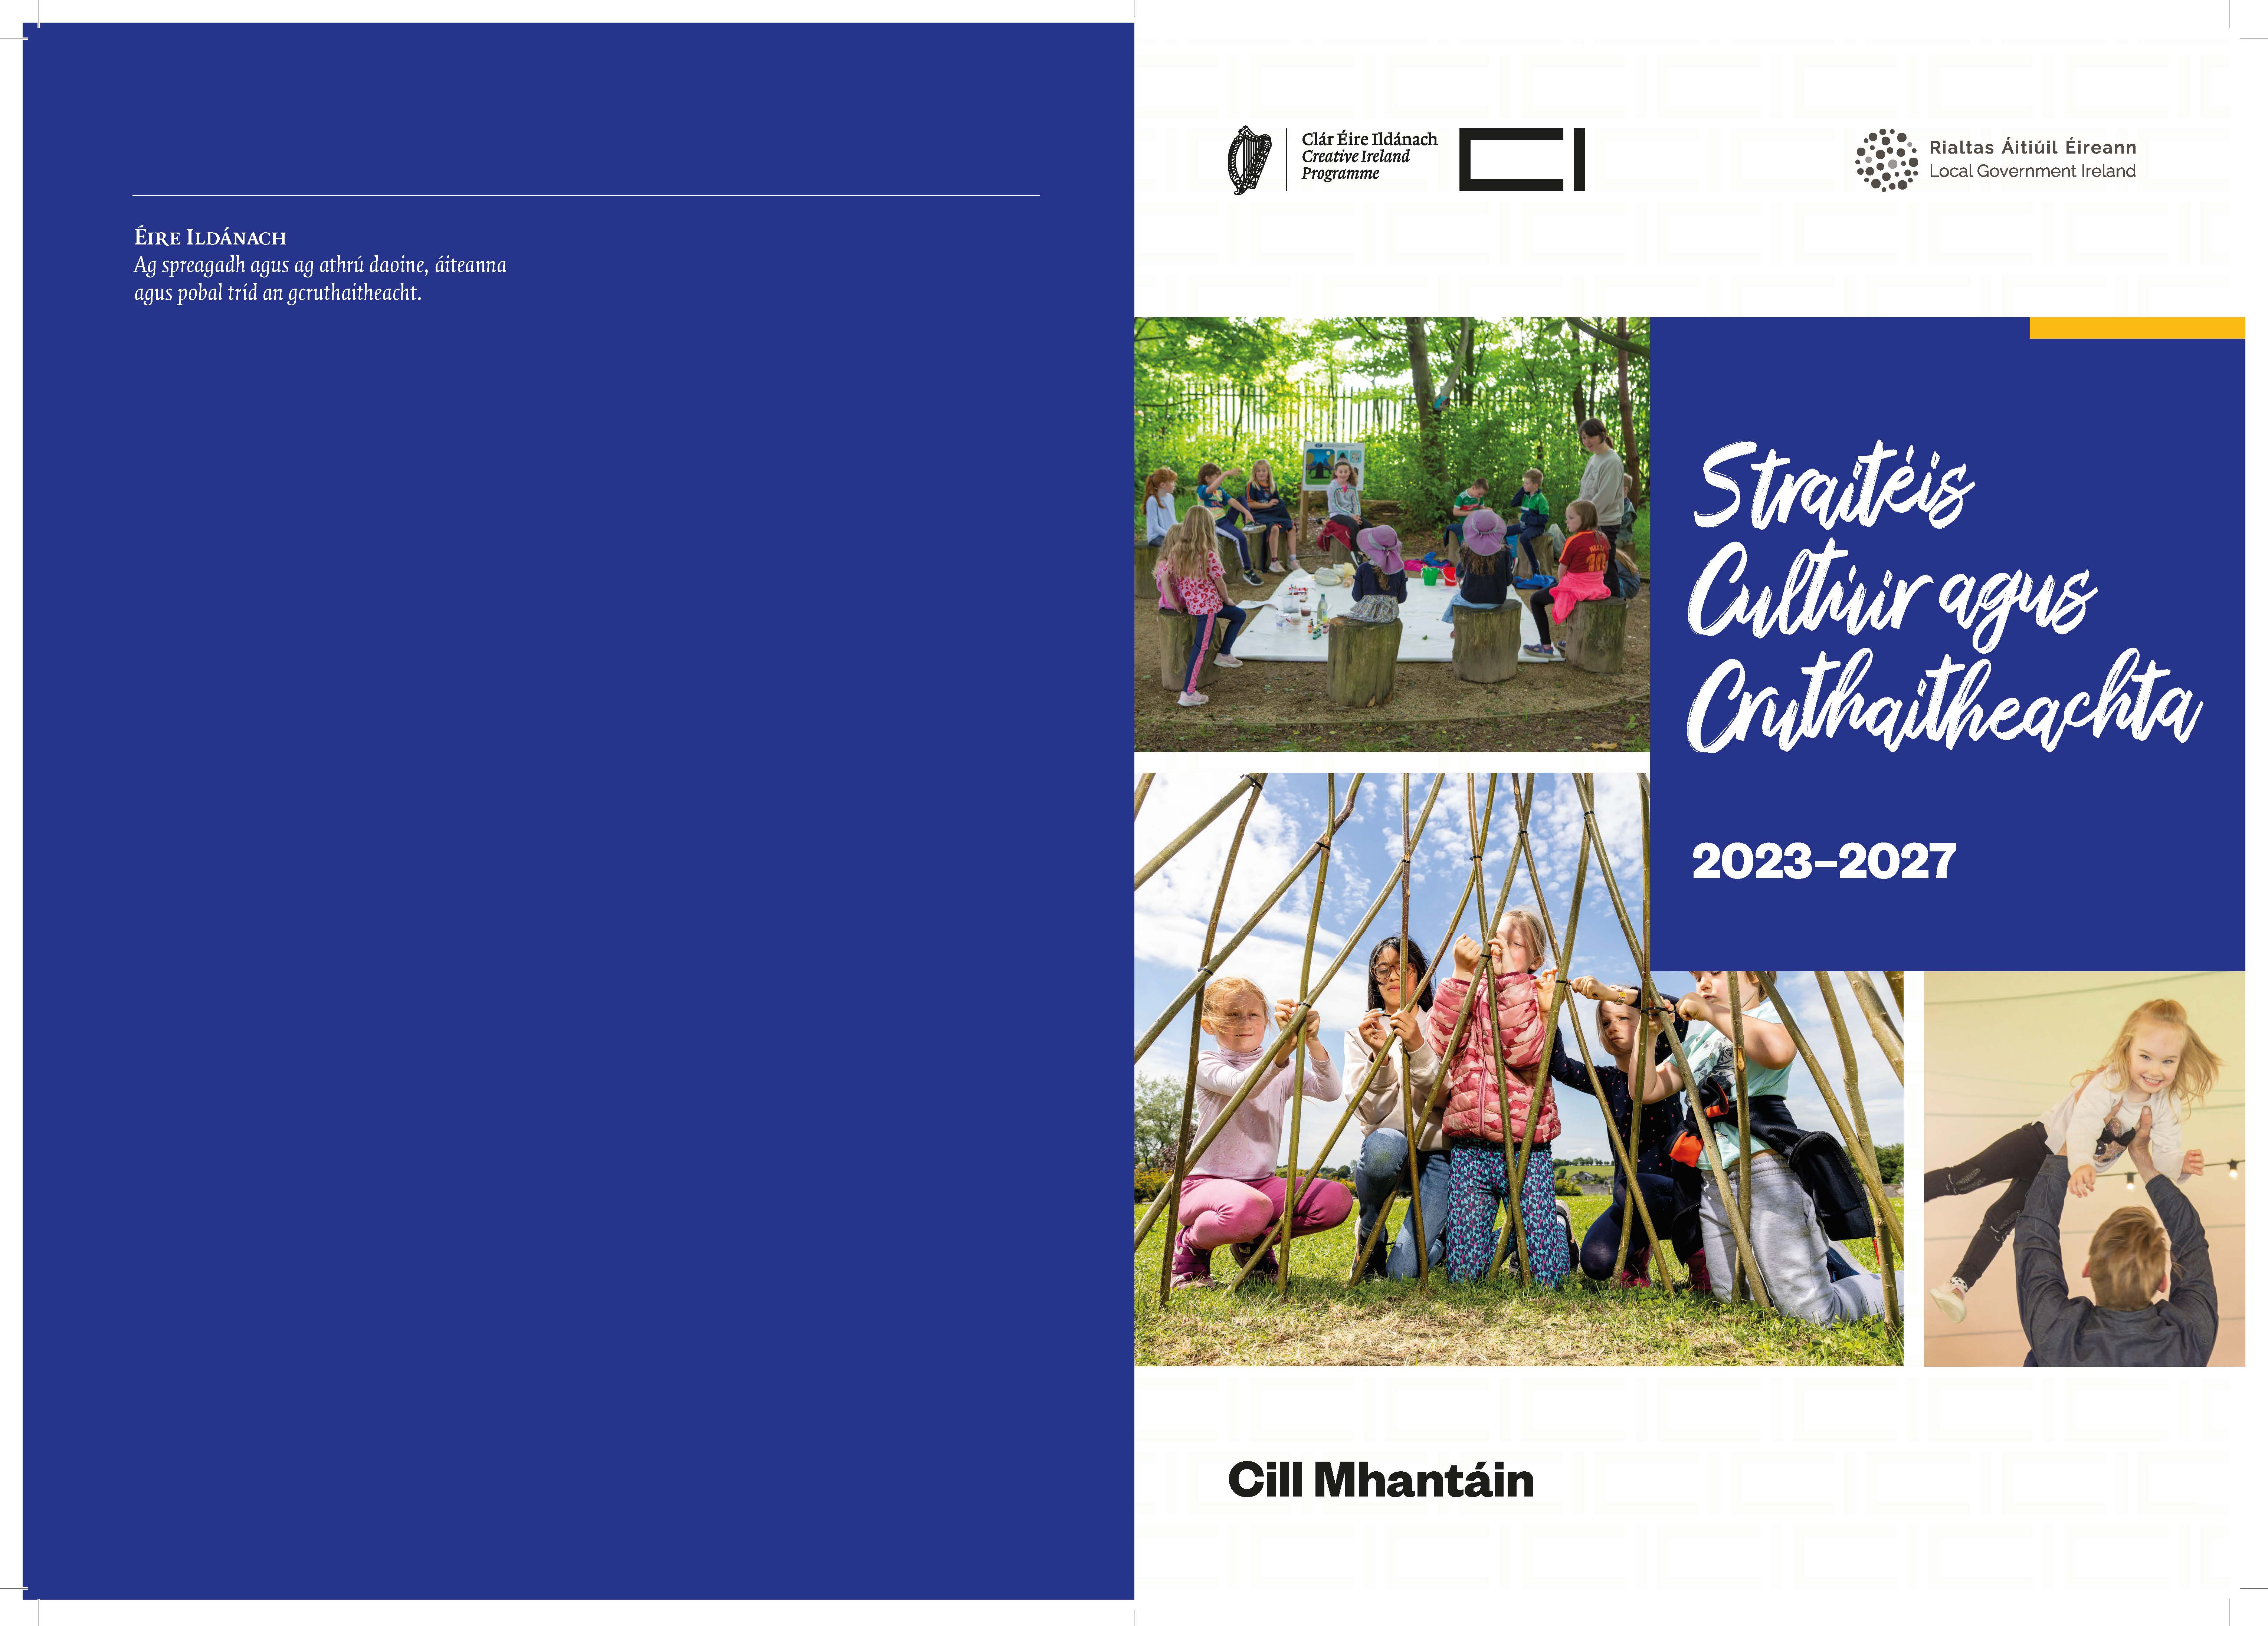 Wicklow Culture and Creativity Strategies 2023-2027